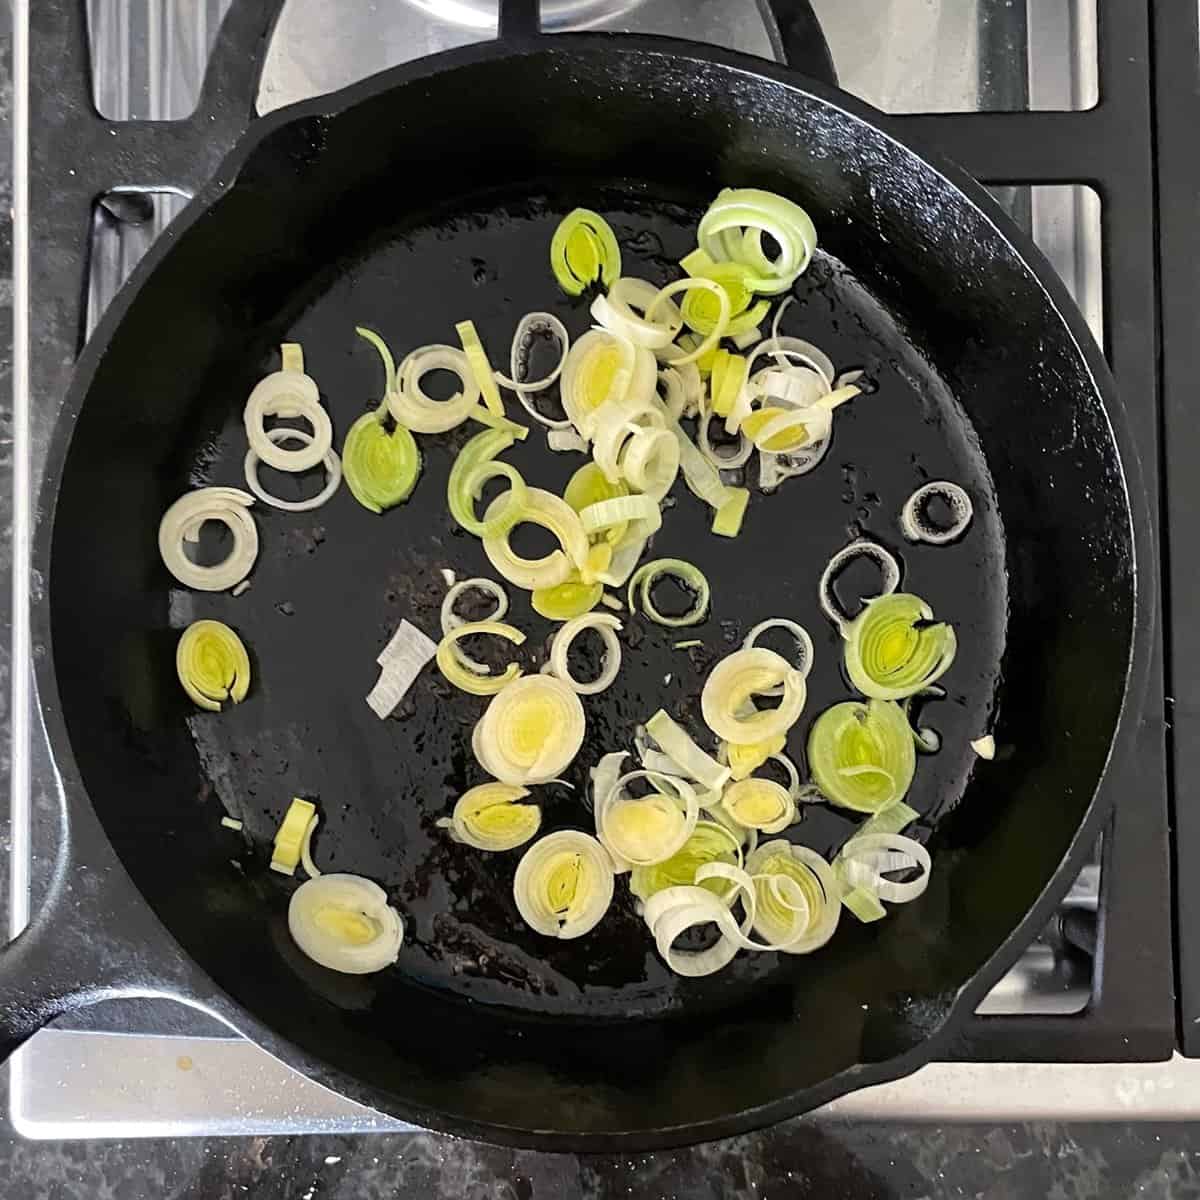 slices of leek cooking in a cast iron skillet.